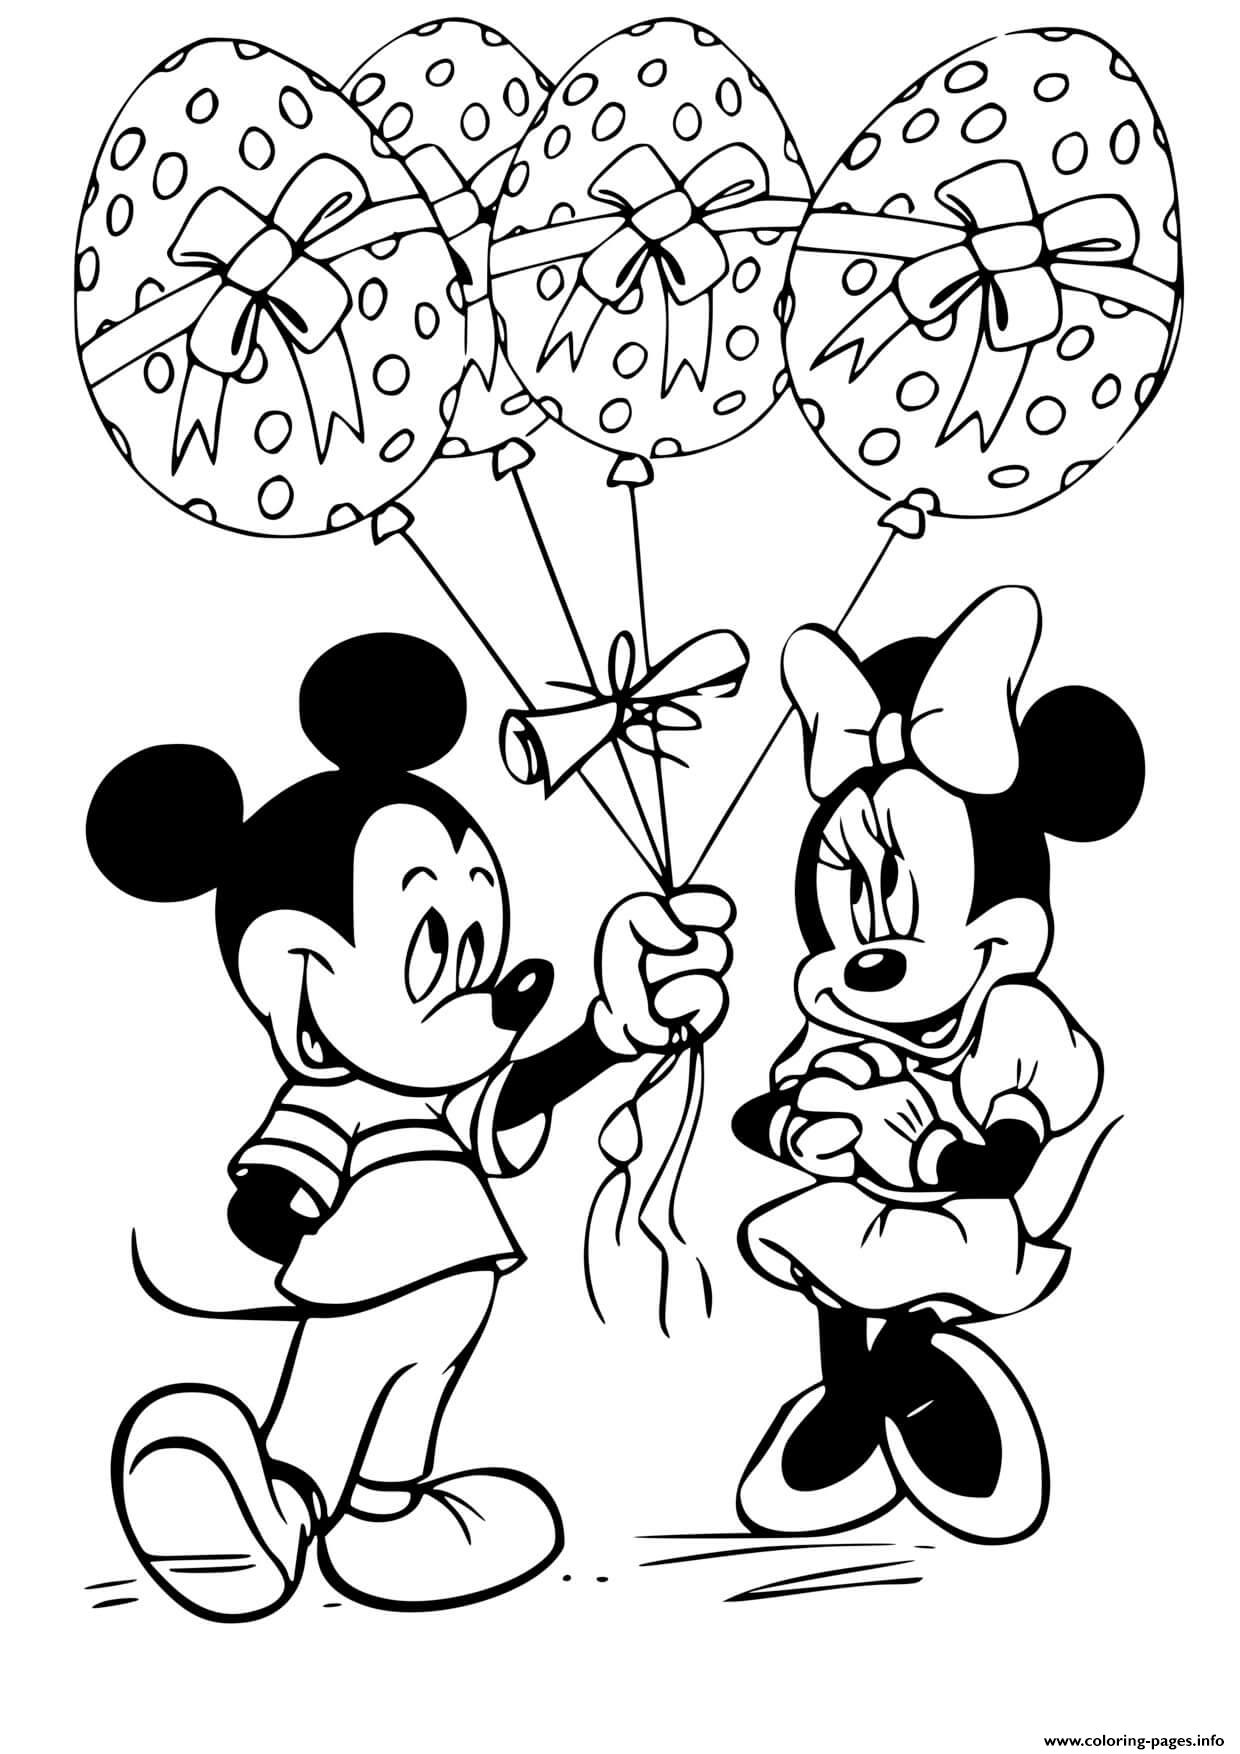 Mickey Mouse Minnie Mouse Easter Egg Balloons coloring